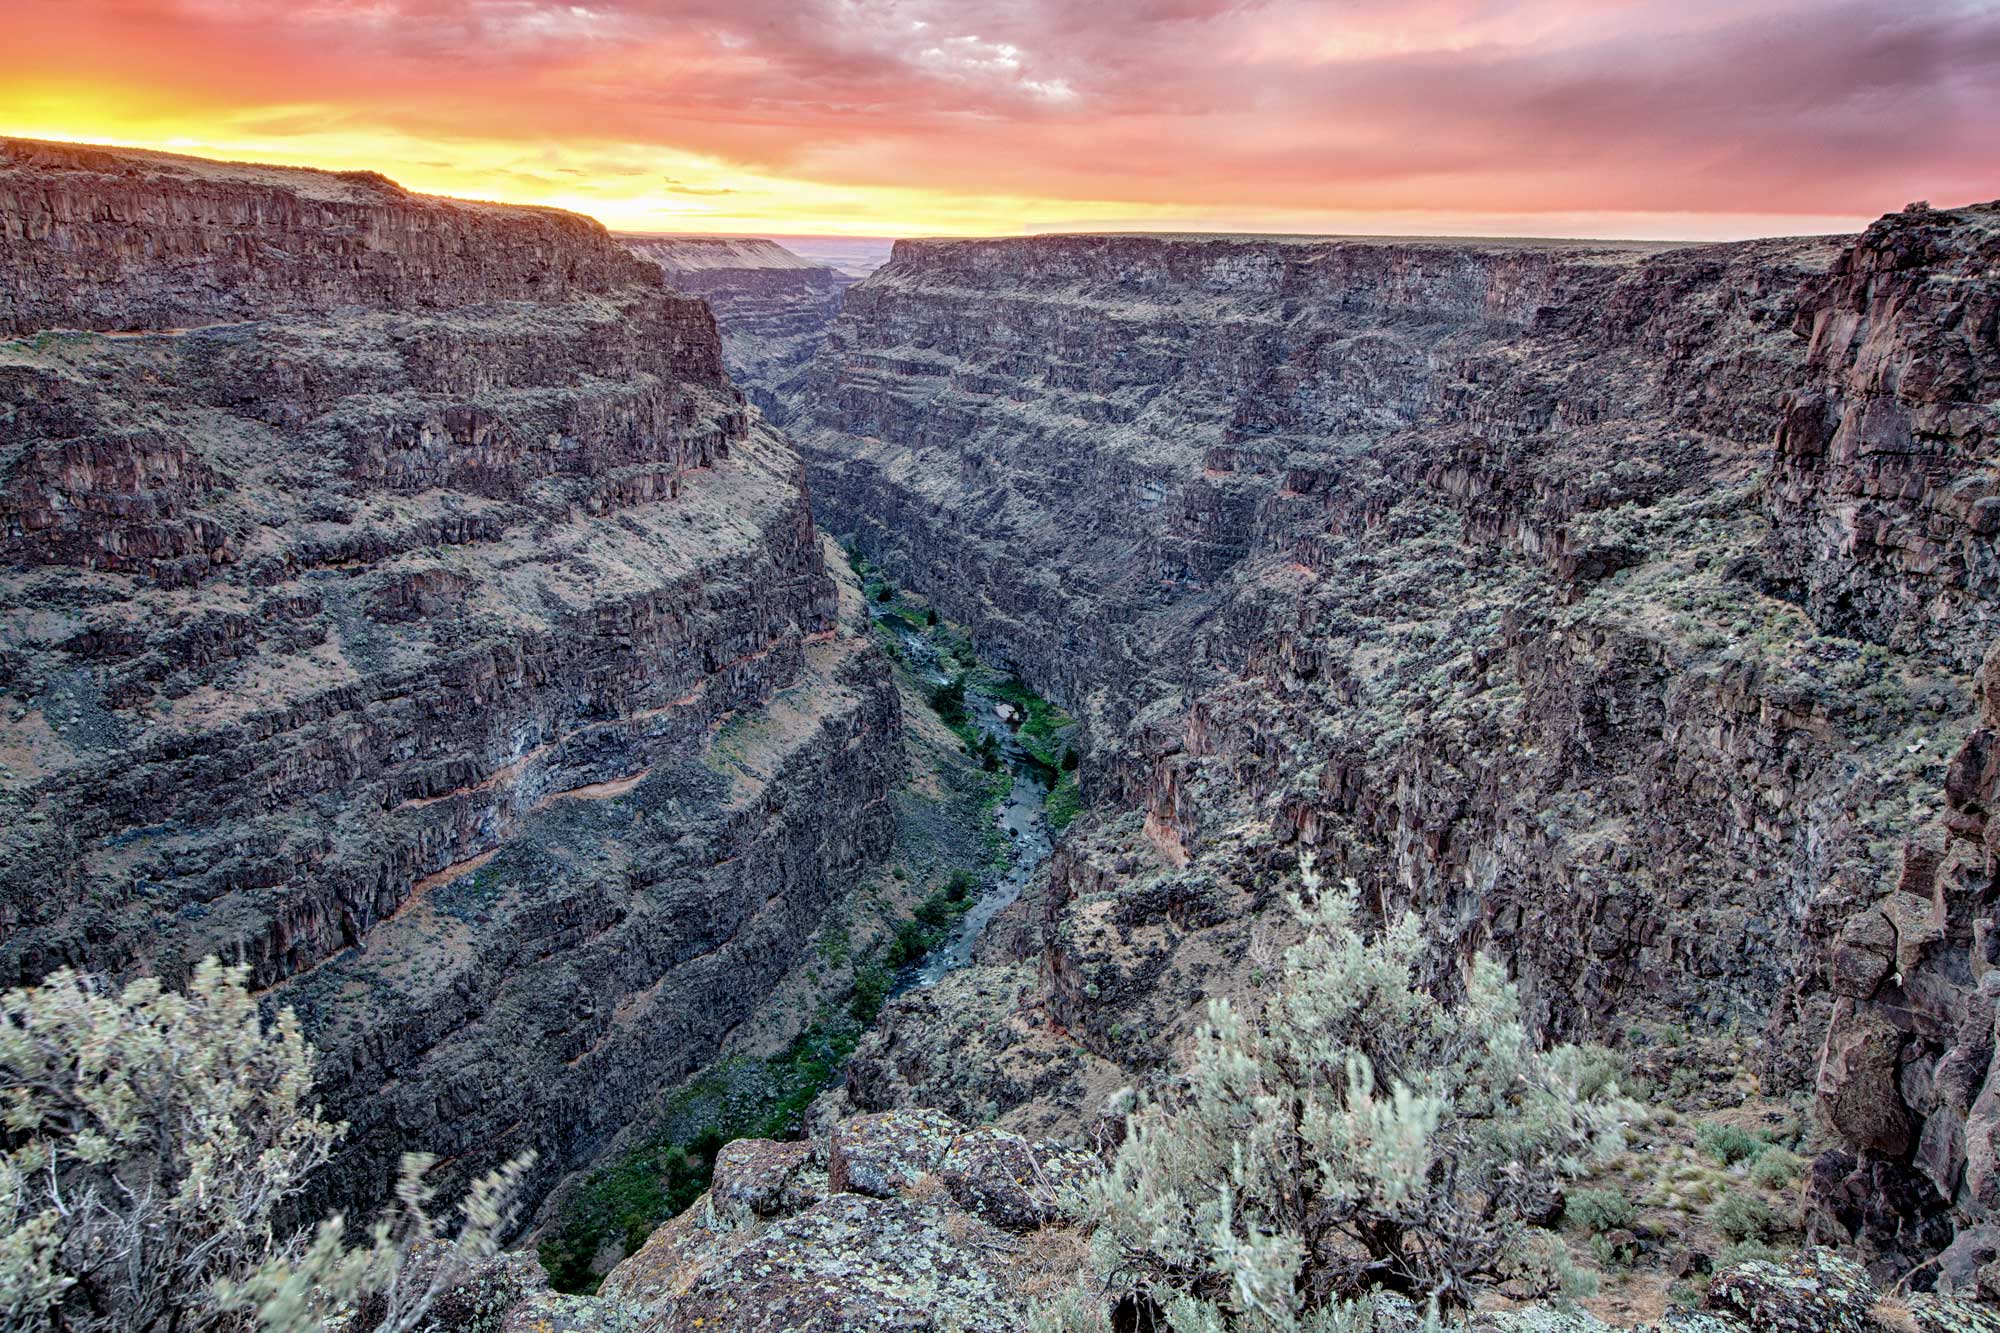 Photograph of a canyon on the Bruneau River in southwestern Idaho. The photo shows a river running through a canyon with steep walls. The walls rise in a steep stair-step fashion on either side of the river. The sky is yellow and orange, perhaps indicating that the photo was taken at sunset.